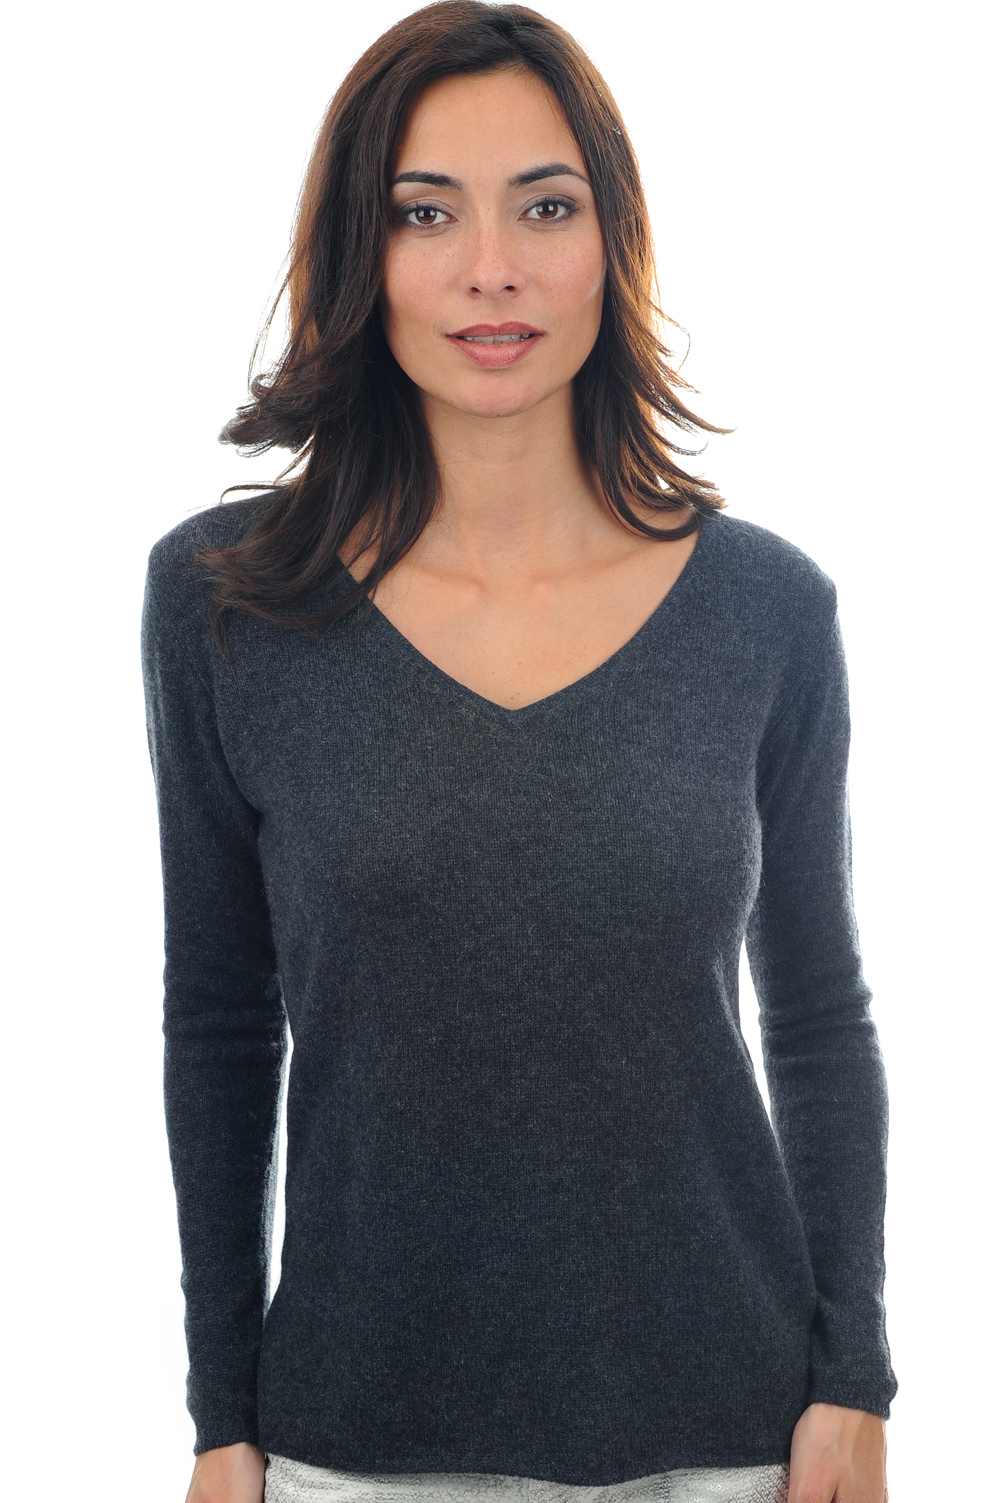 Cashmere ladies basic sweaters at low prices flavie charcoal marl s